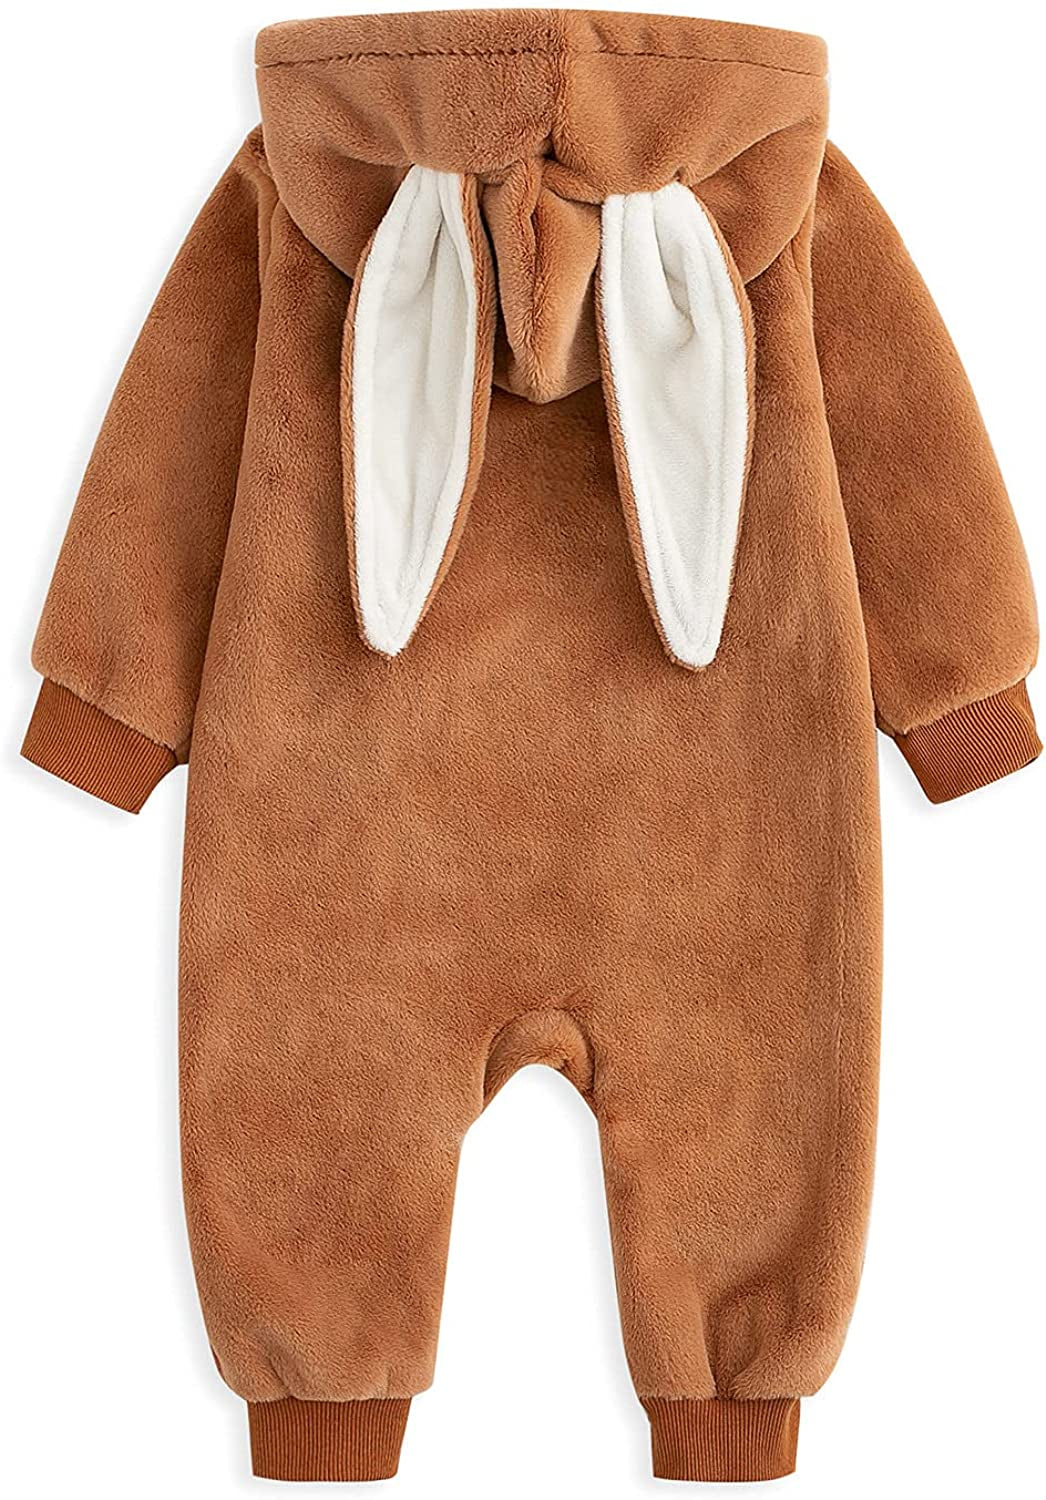 "Zip-Zap-Zoom: Ultimate Bunny Jumpsuit with Super Long Ears for Your Hopping Baby!"